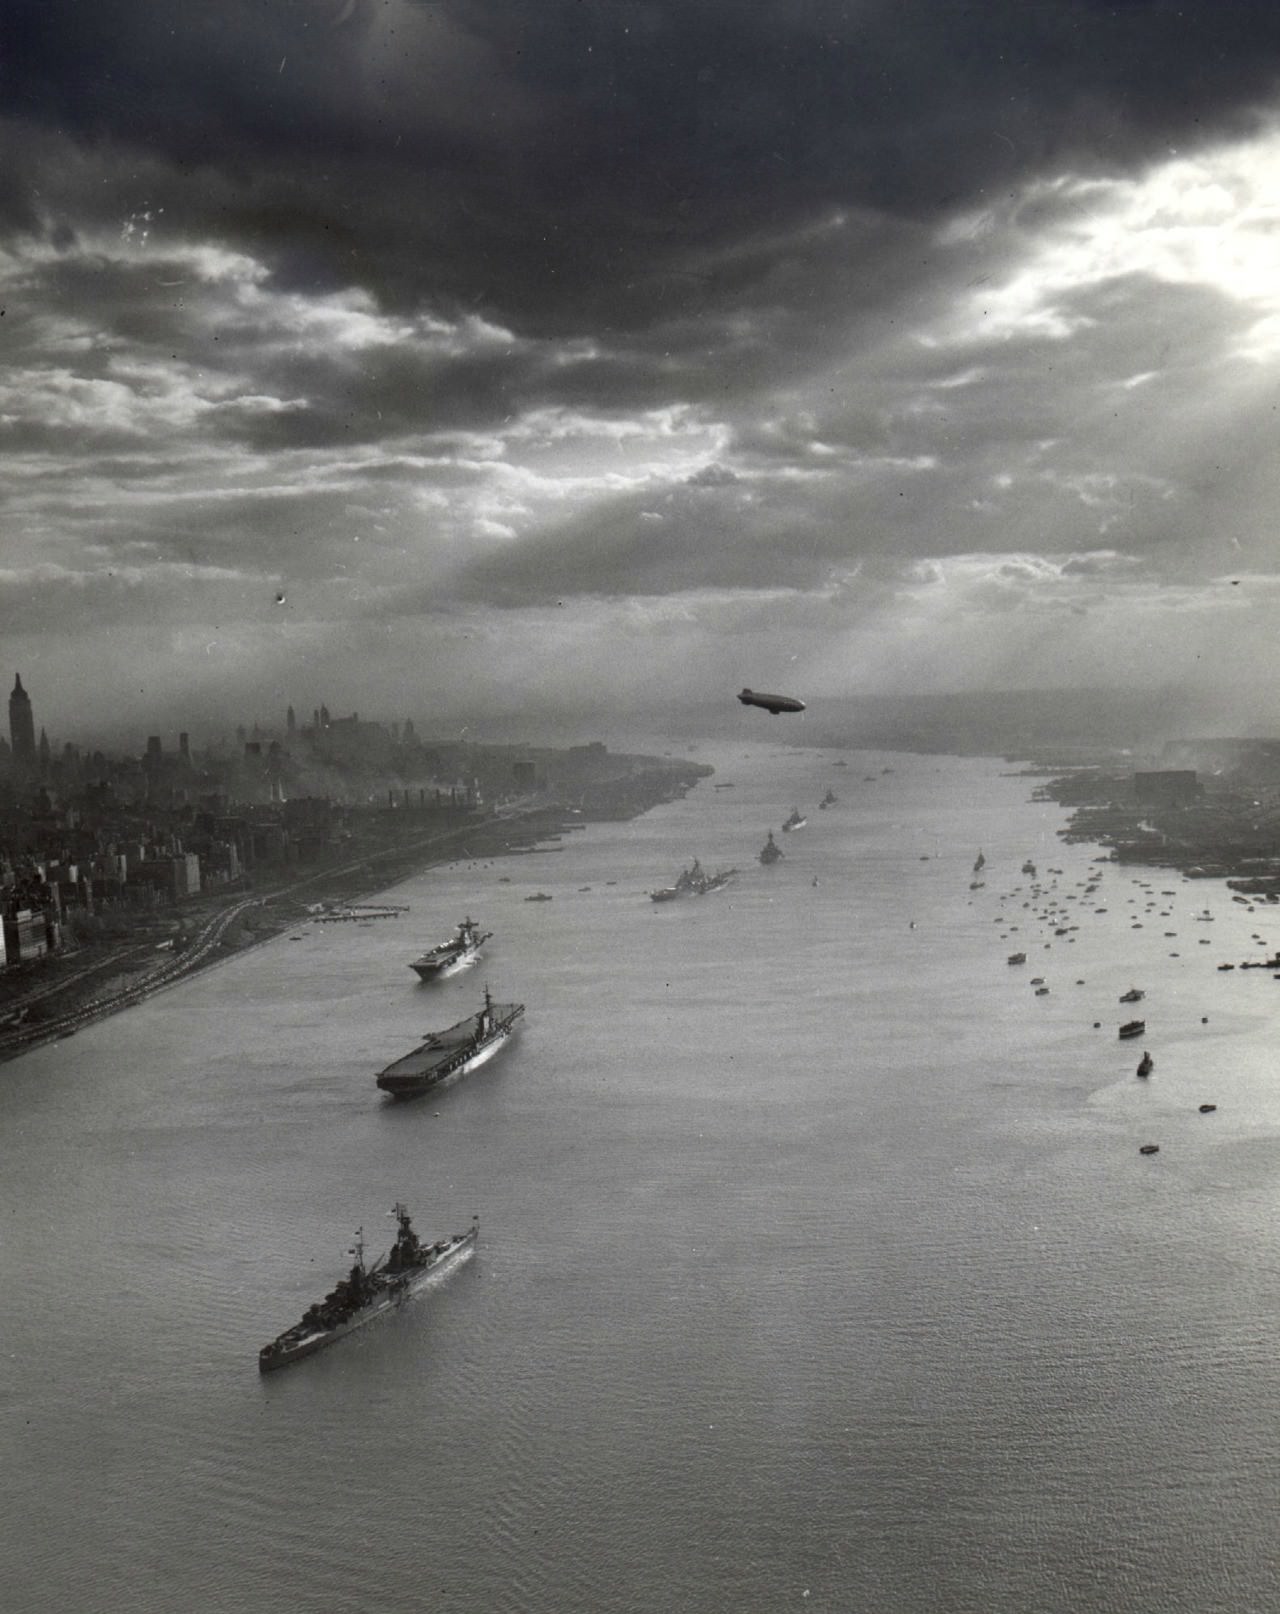 photography, Monochrome, United States Navy, River, Battleship, Ship, USA, New York City, History, 1945, Zeppelin, Clouds, Portrait display, Cityscape, Skyscraper, Sun rays, Historic, Vintage, Old photos Wallpaper